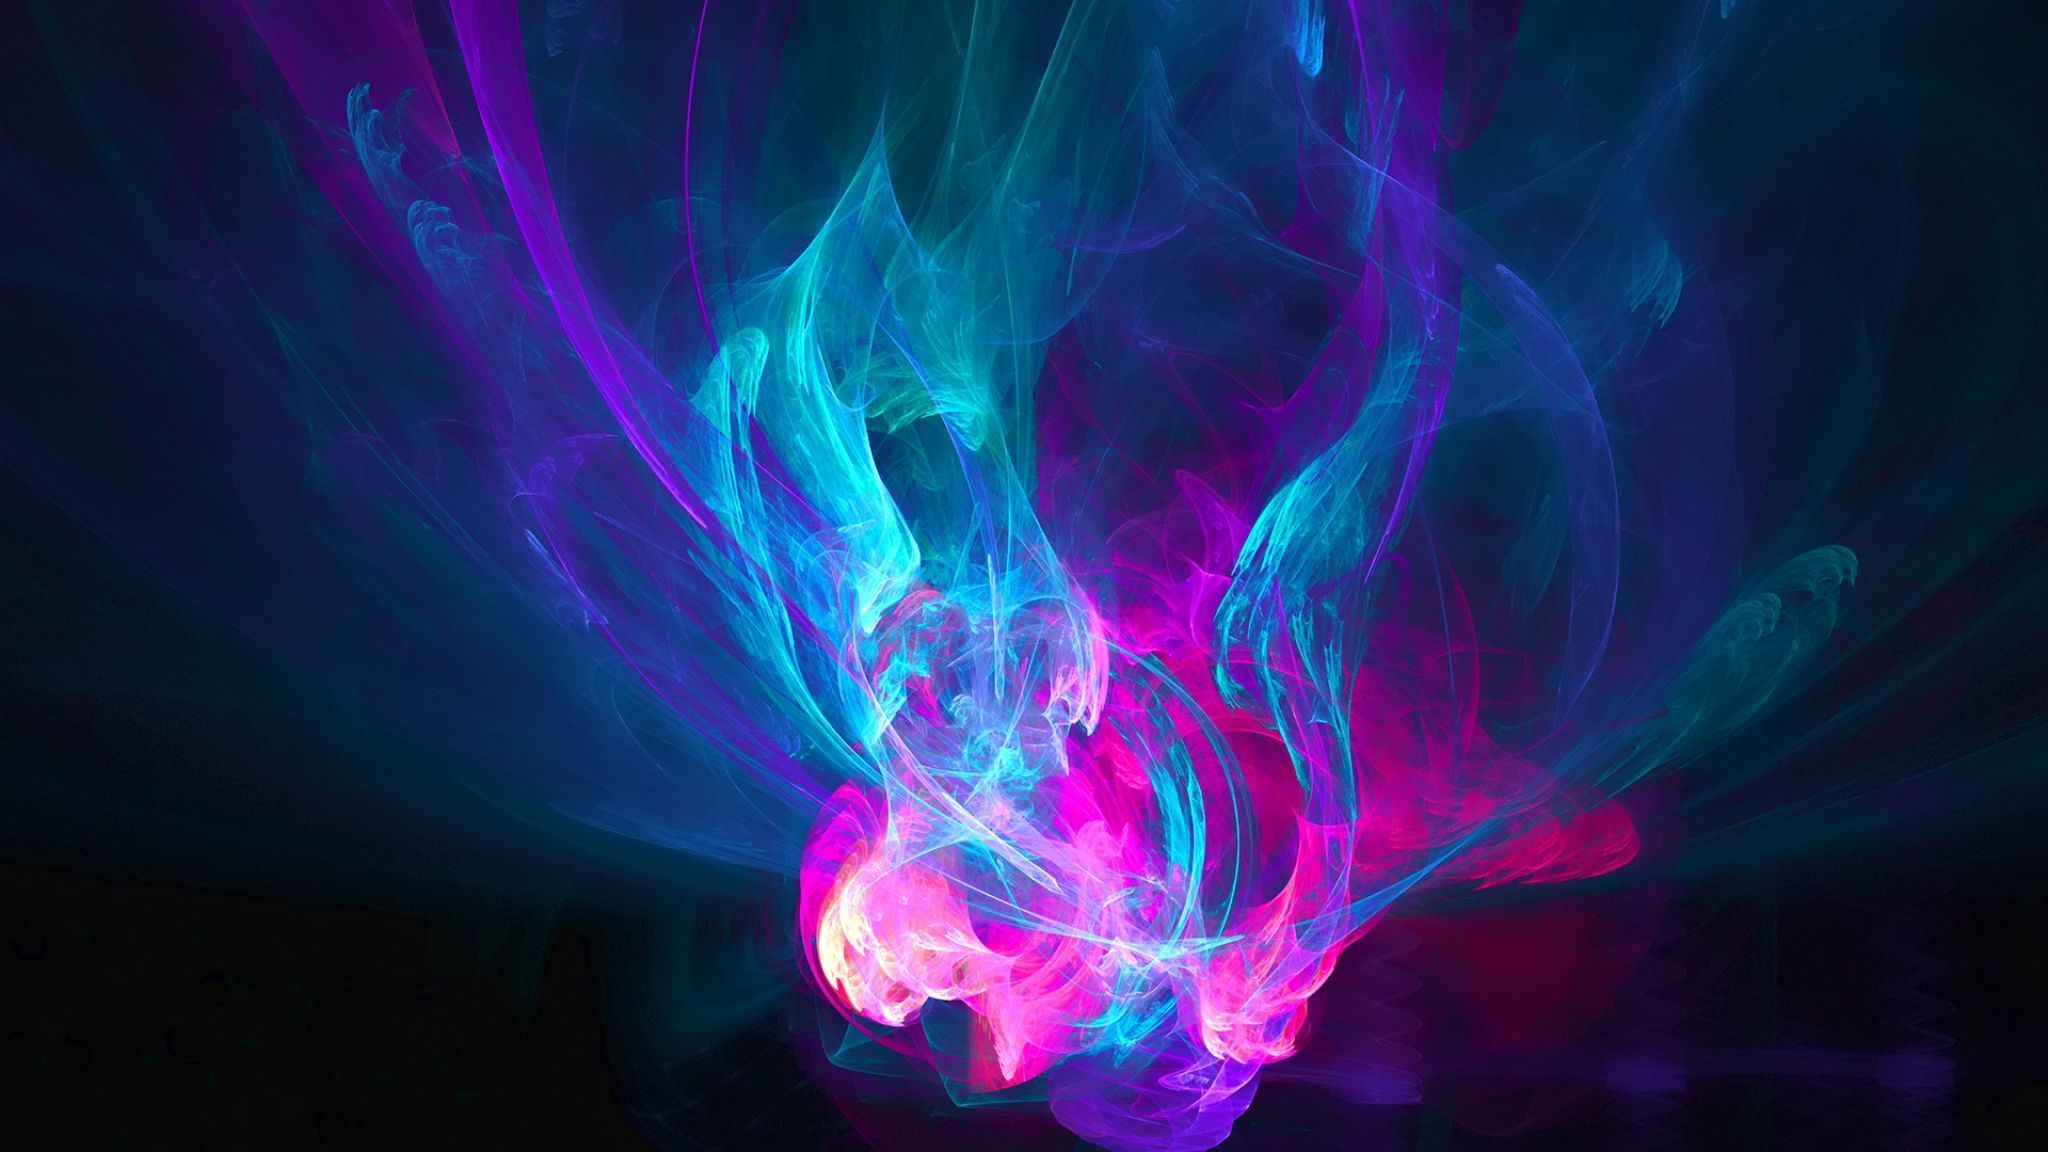 Download Wallpaper 2048x1152 Abstraction, Light, Pink, Blue